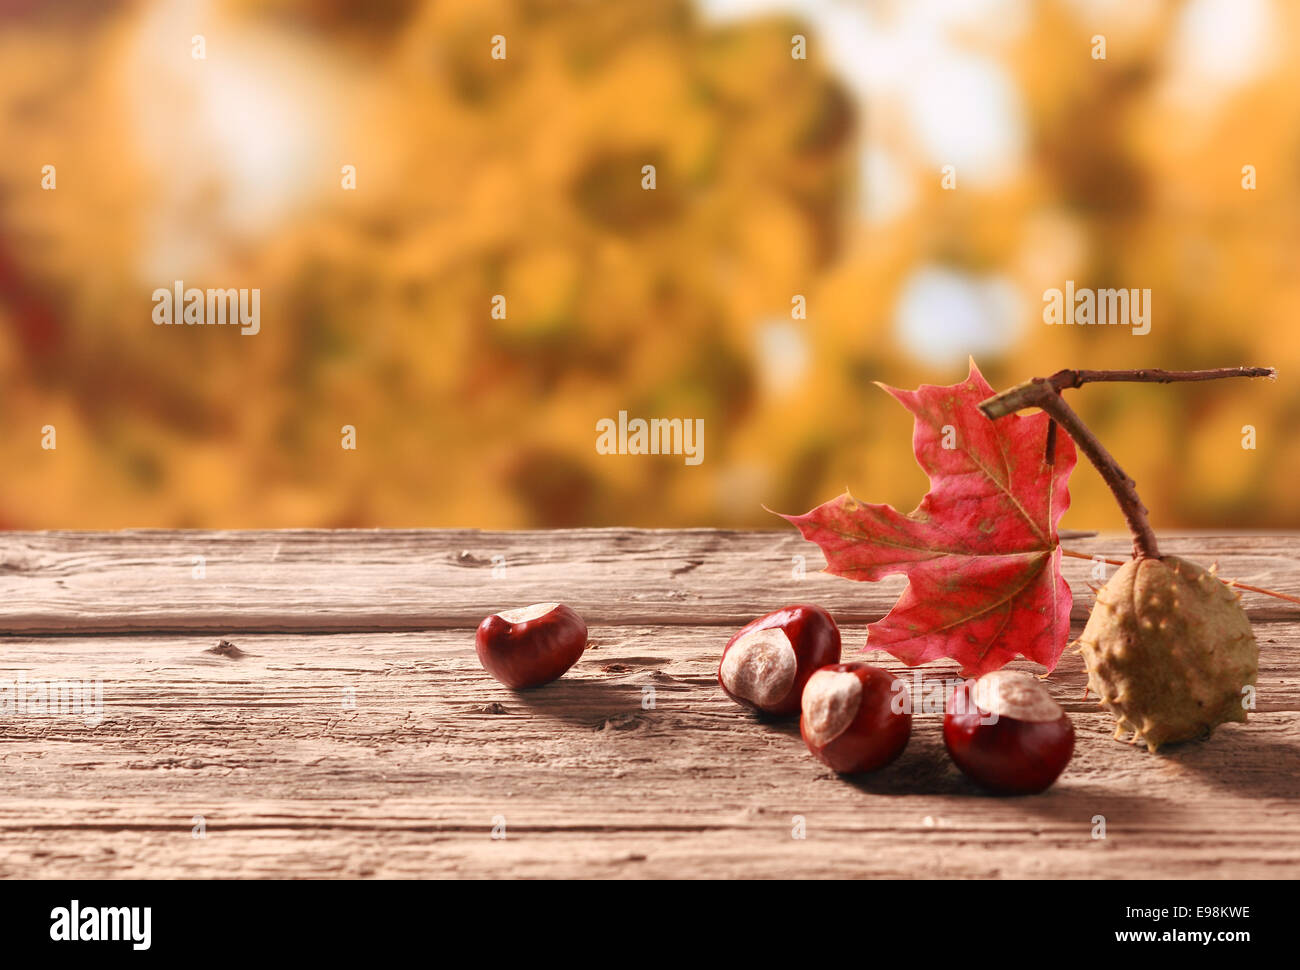 Fresh chestnuts from an autumn harvest lying on an old rustic wooden table with a colorful red leaf against a backdrop of autumn foliage in a garden, with copyspace Stock Photo